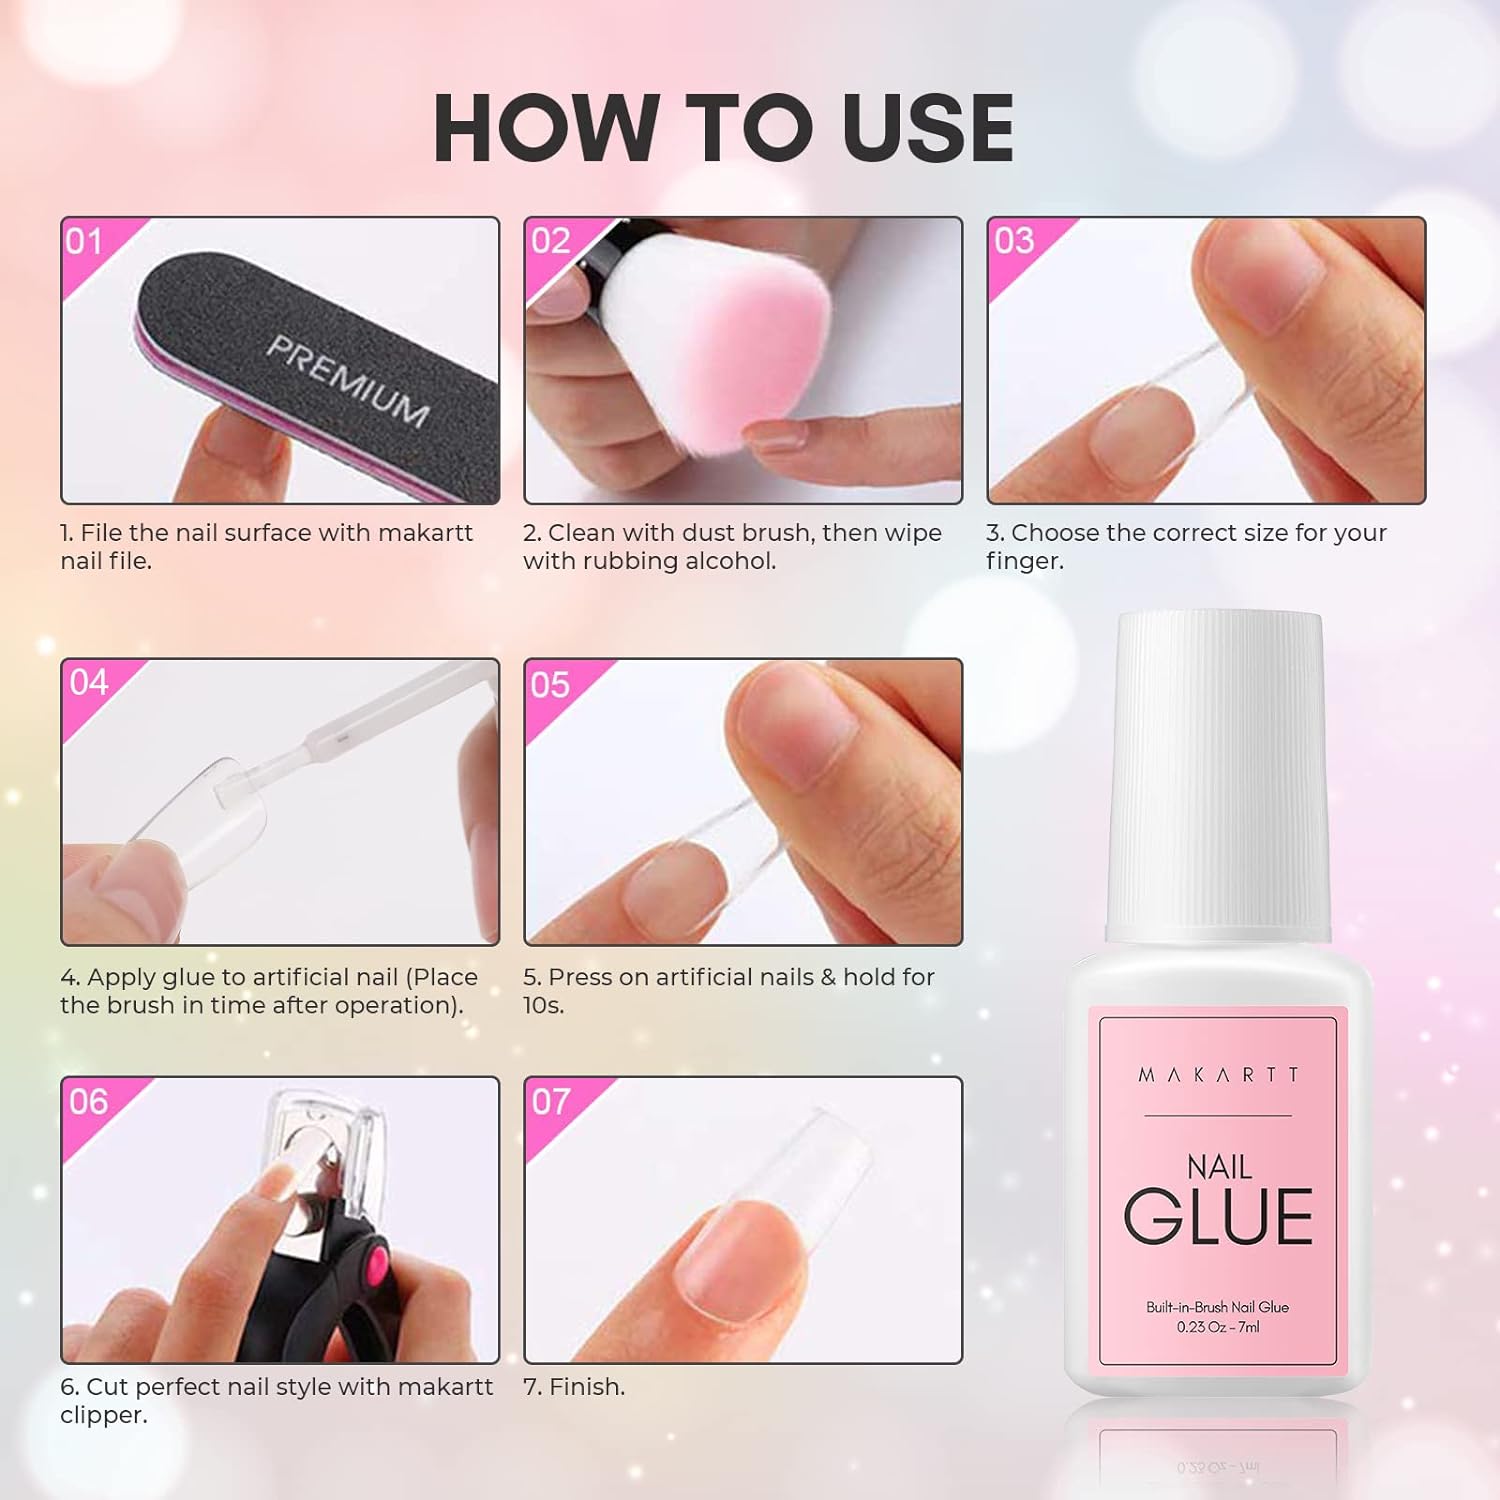 How to Apply Press on Nails Without Glue - YouTube